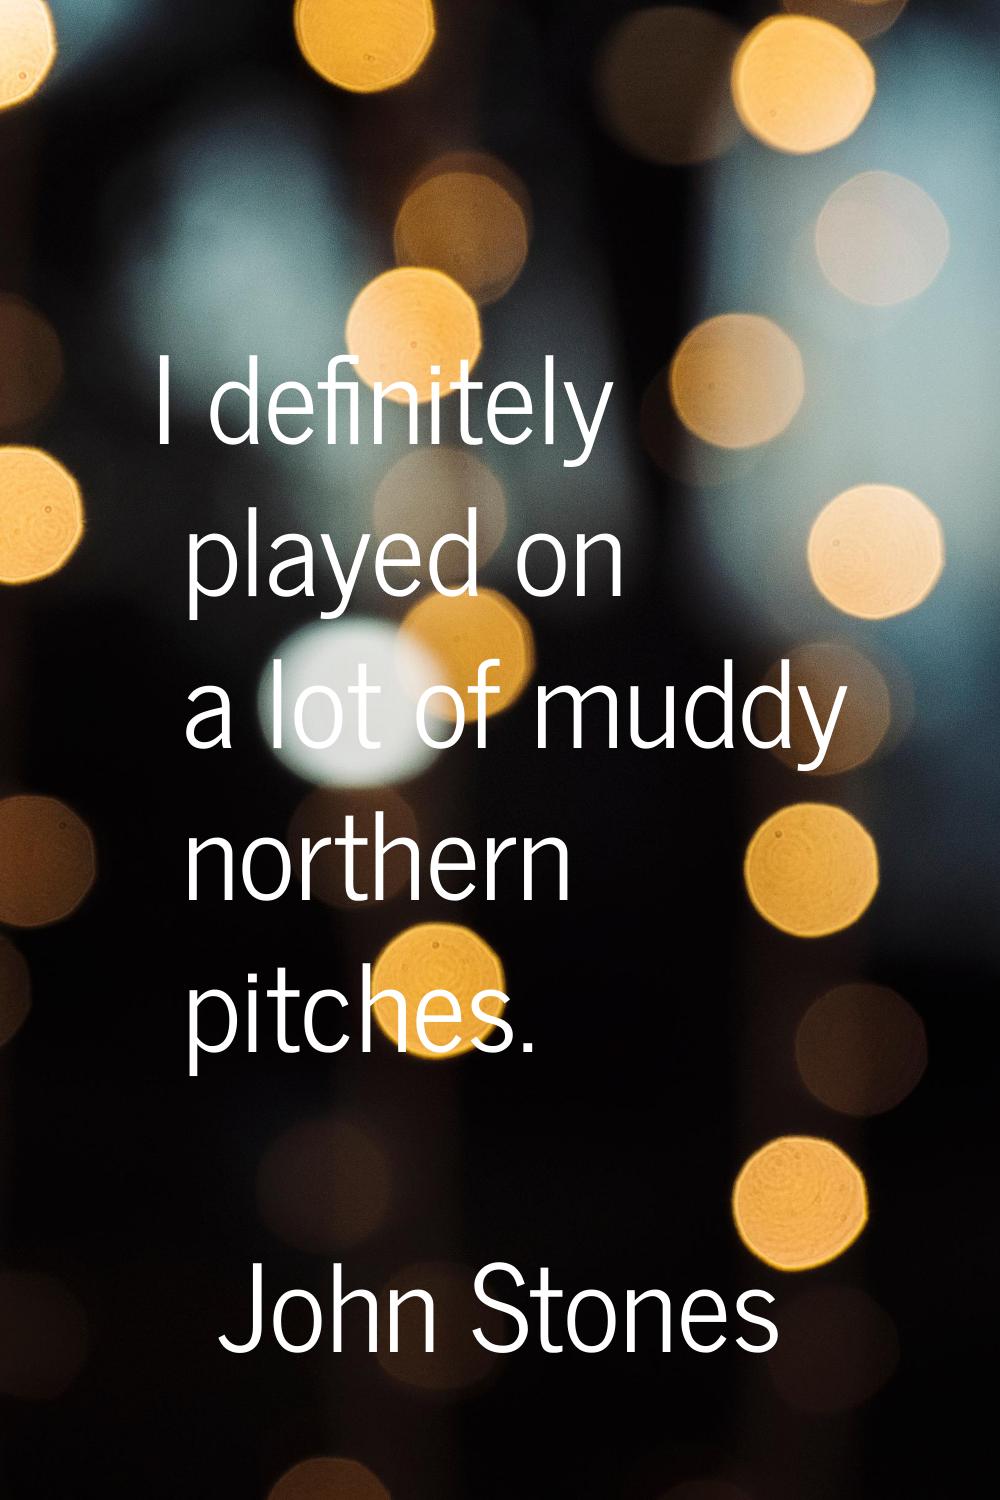 I definitely played on a lot of muddy northern pitches.